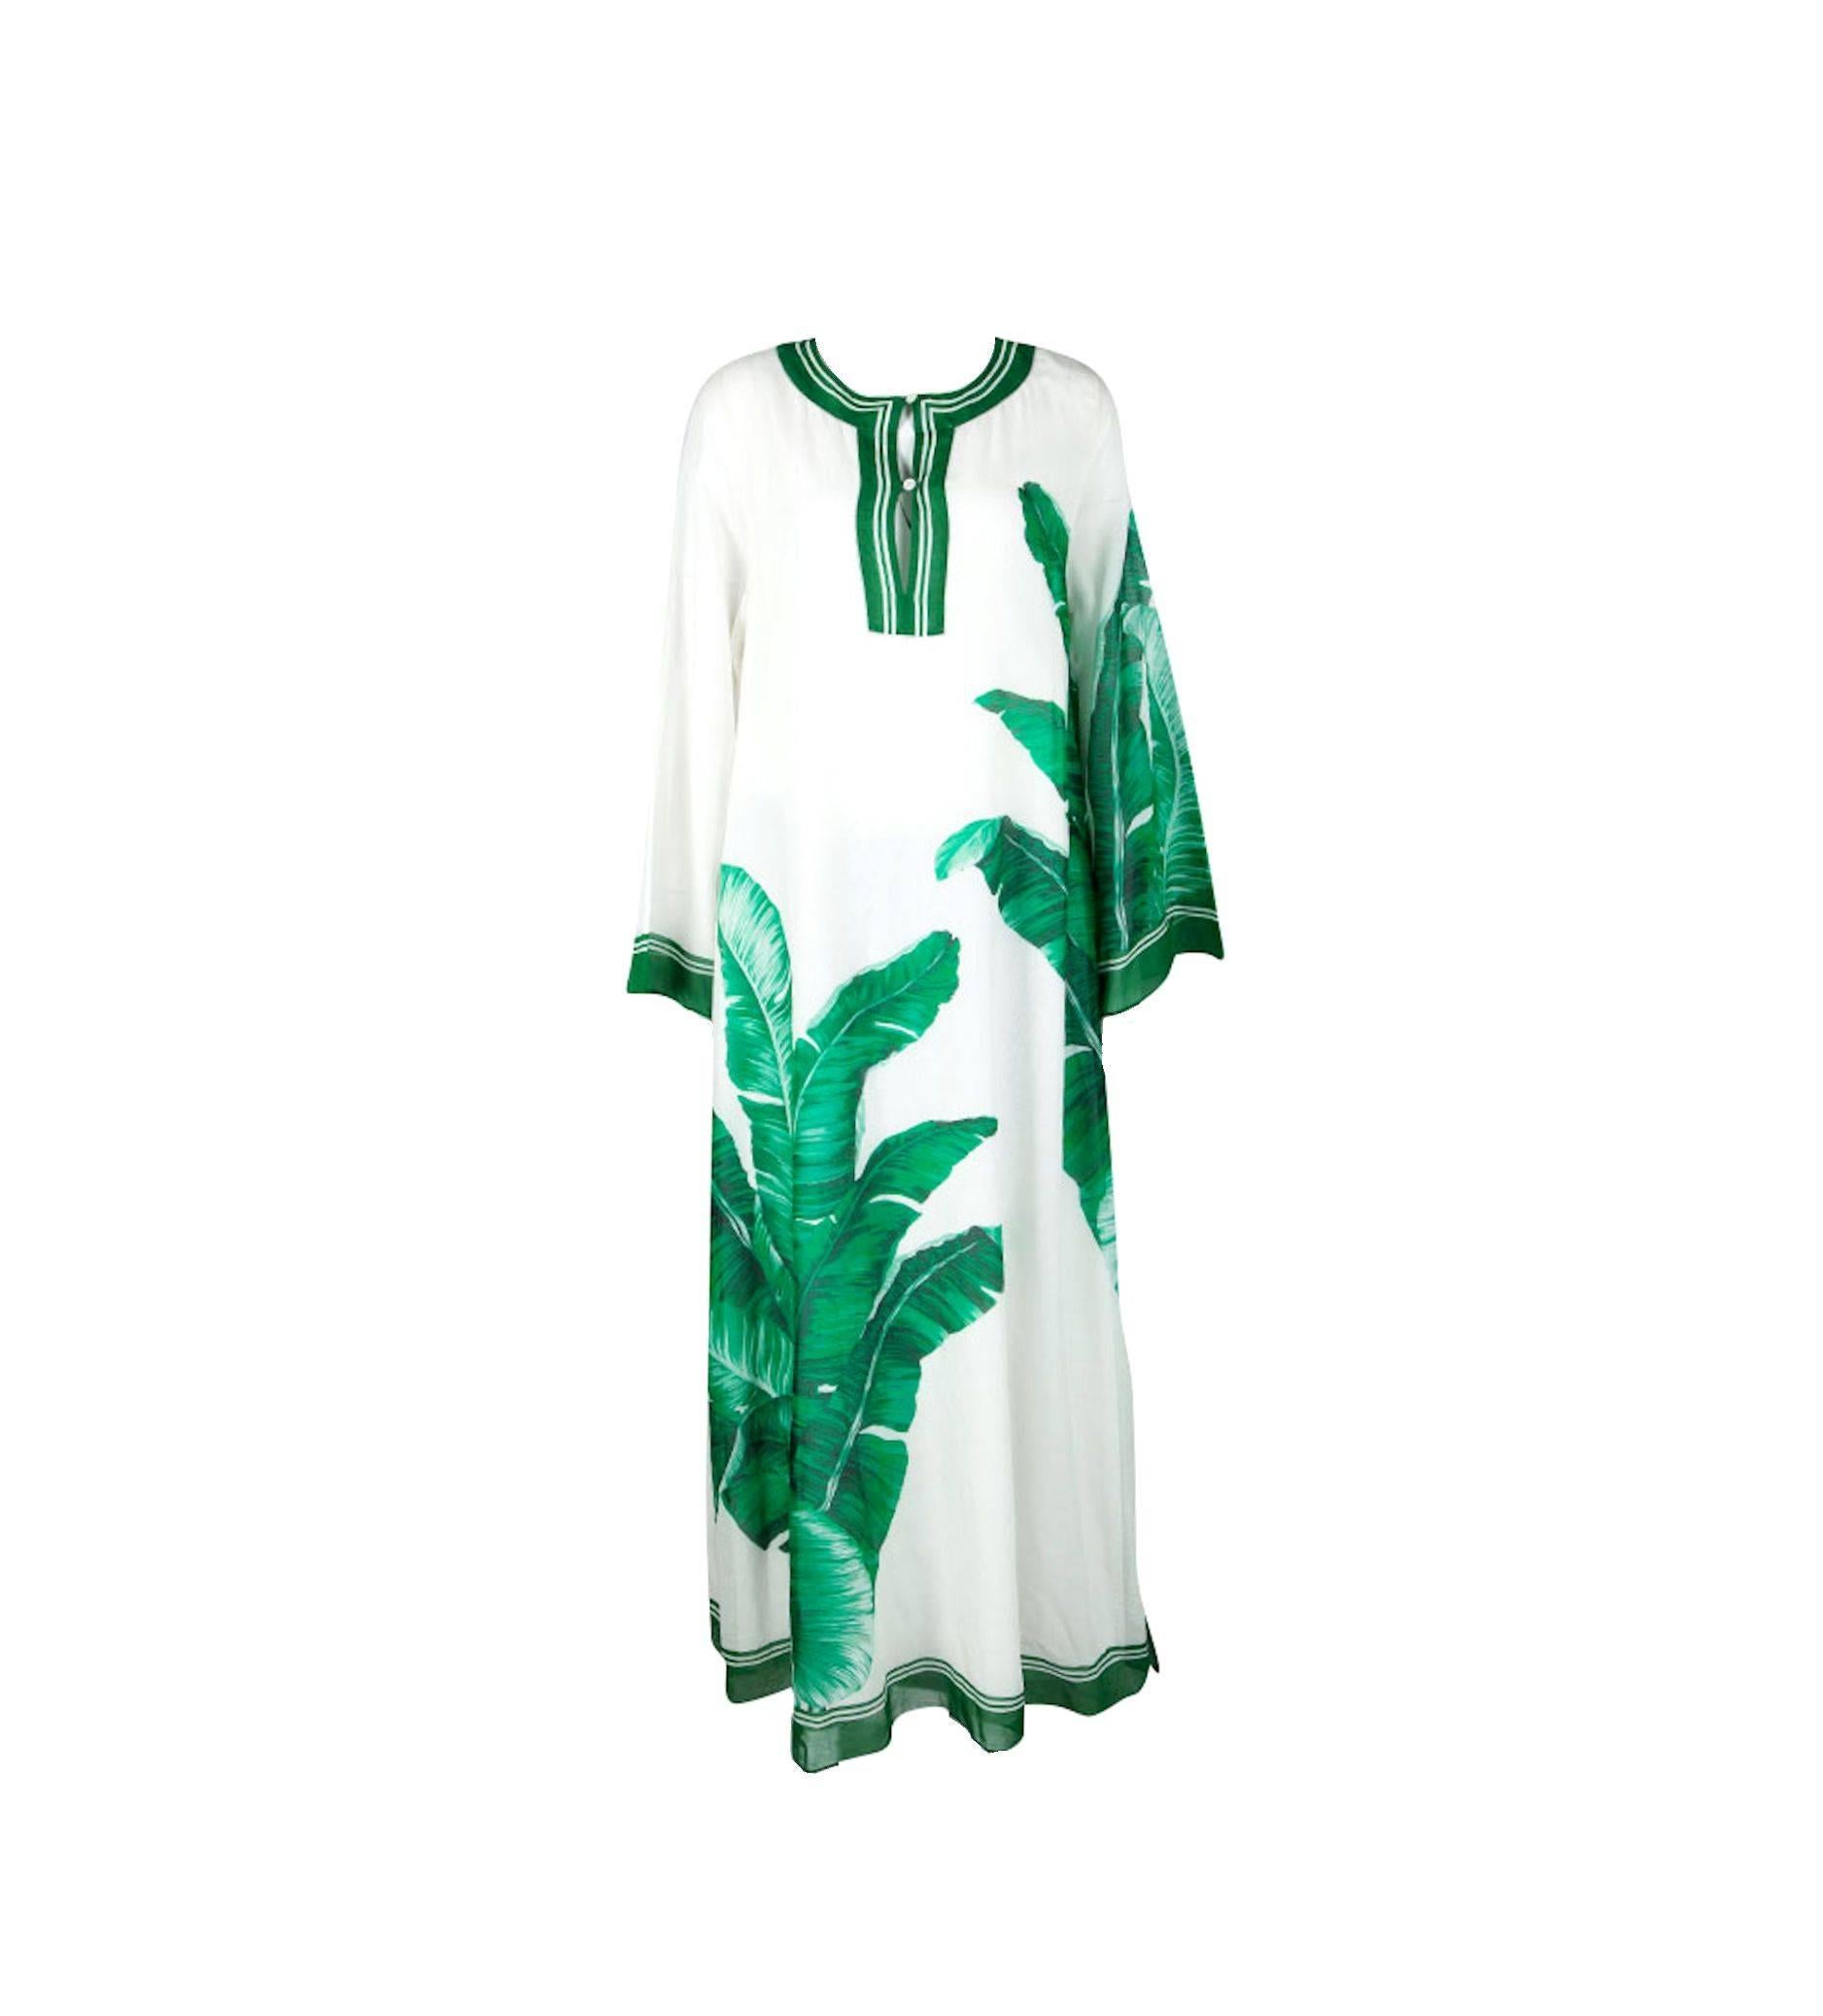 Beautiful DOLCE & GABBANA banana leaf print maxi kaftan dress
Signature piece with the famous print - sold out everywhere
Simply slips on
Dry Clean only
Finest voile fabric
Soft cotton silk mix fabric
Full length
Made in Italy
Dry clean only
Please